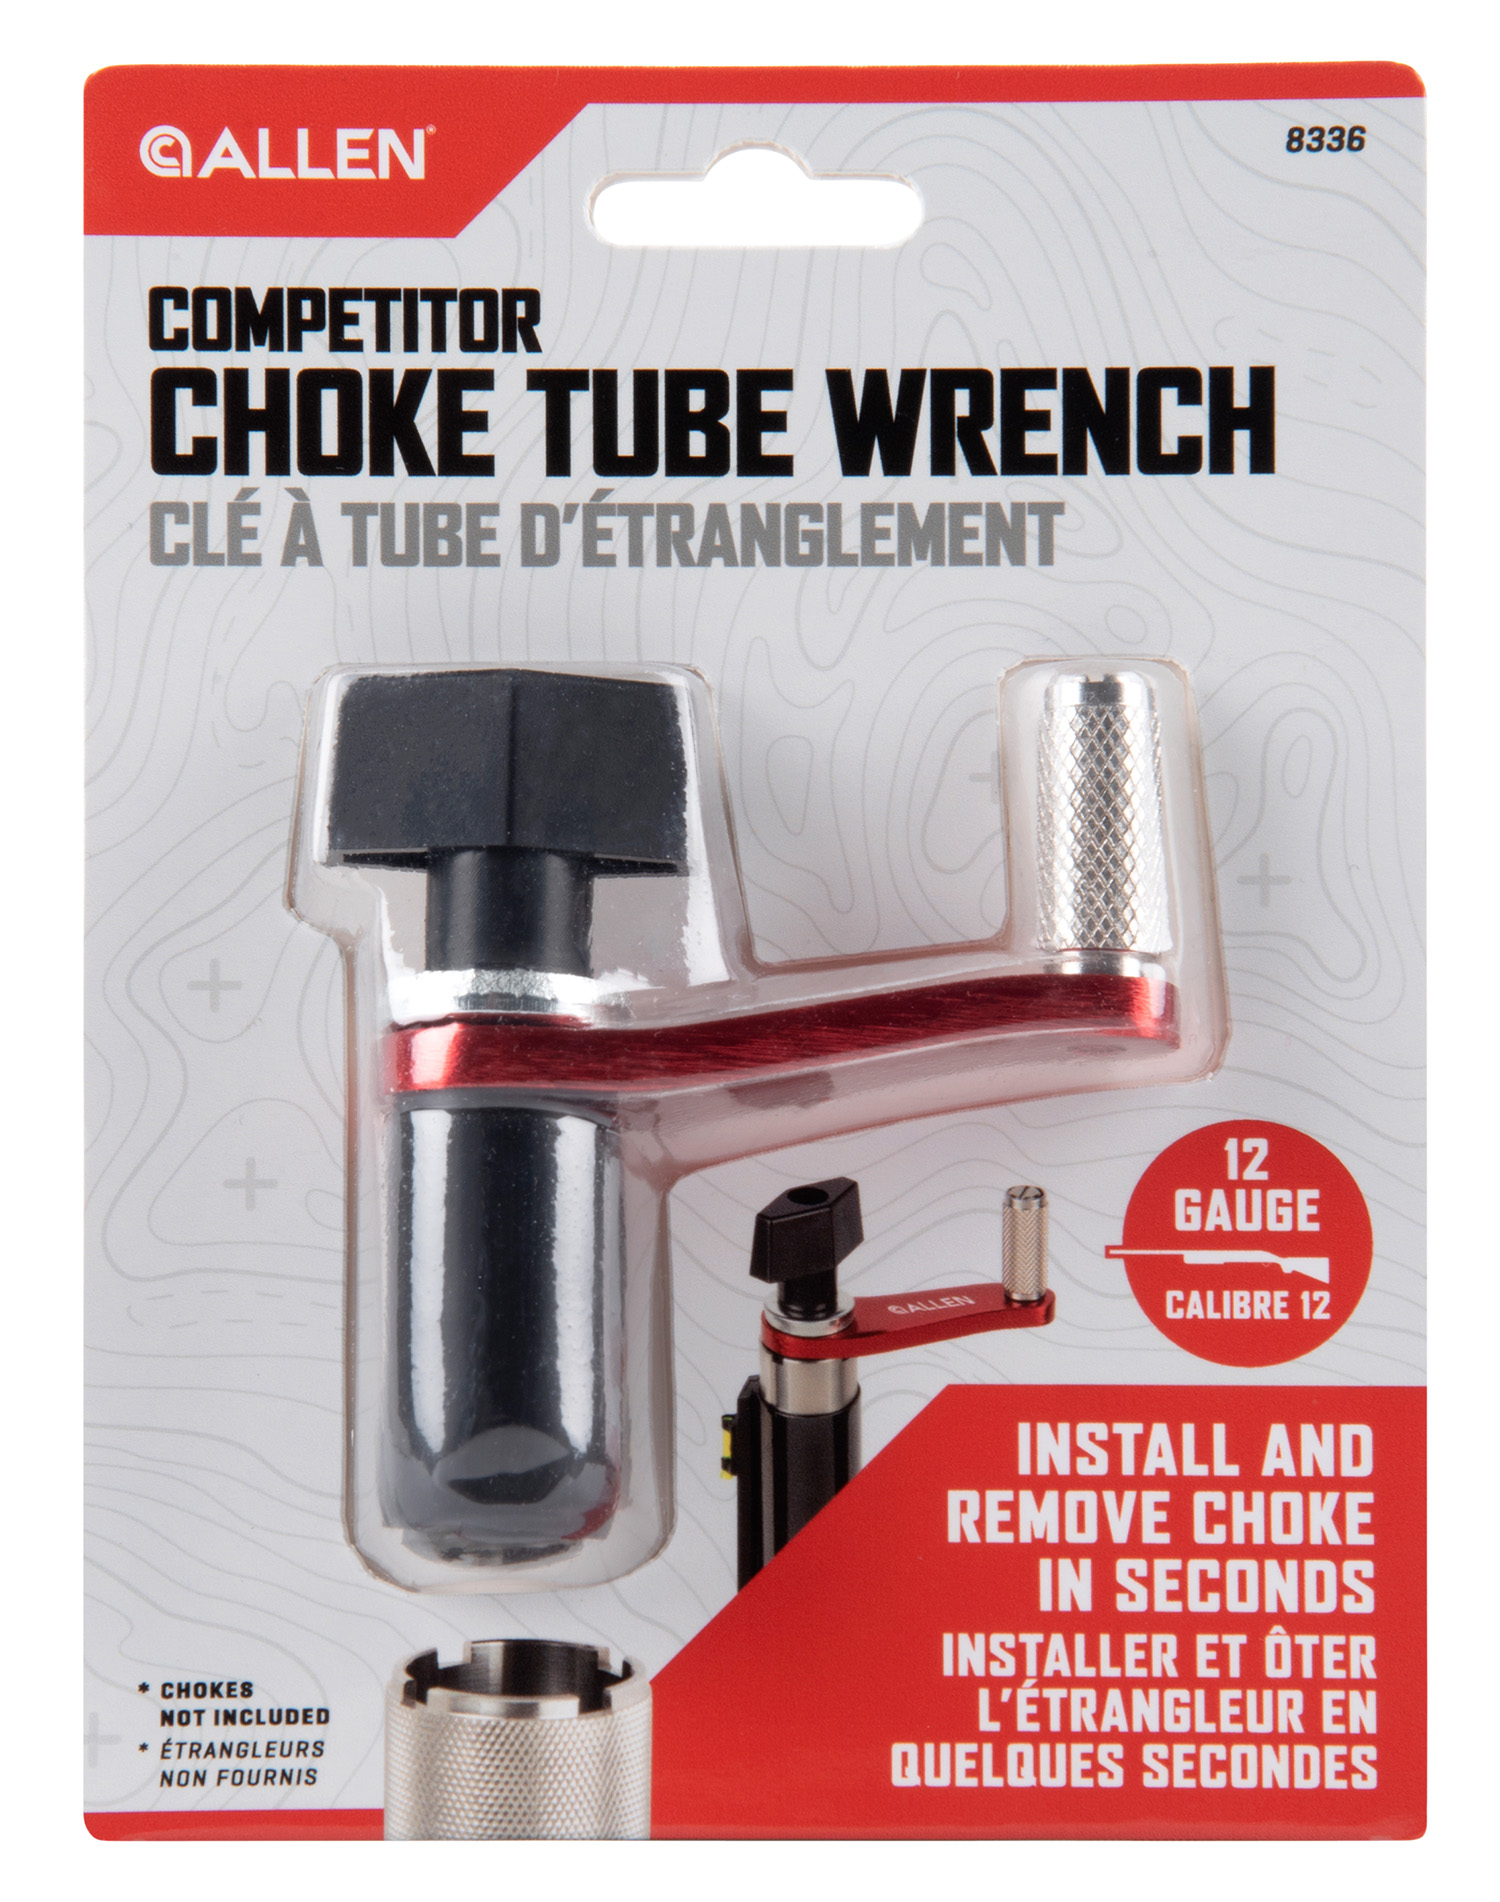 Allen 8336 Competitor Choke Tube Wrench Black with Red, Silver Accents Steel for 12 Gauge Shotguns